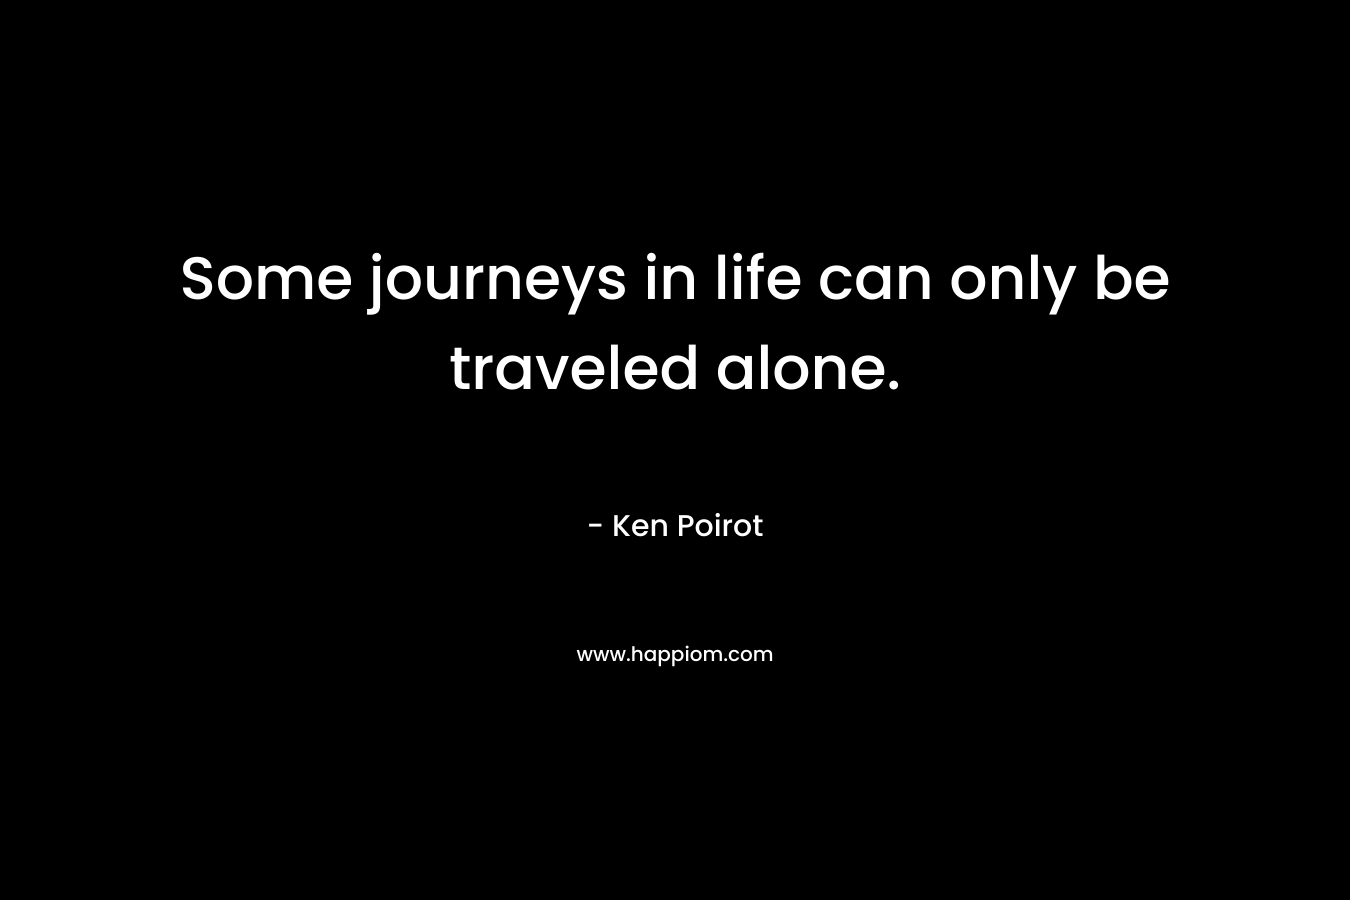 Some journeys in life can only be traveled alone. – Ken Poirot